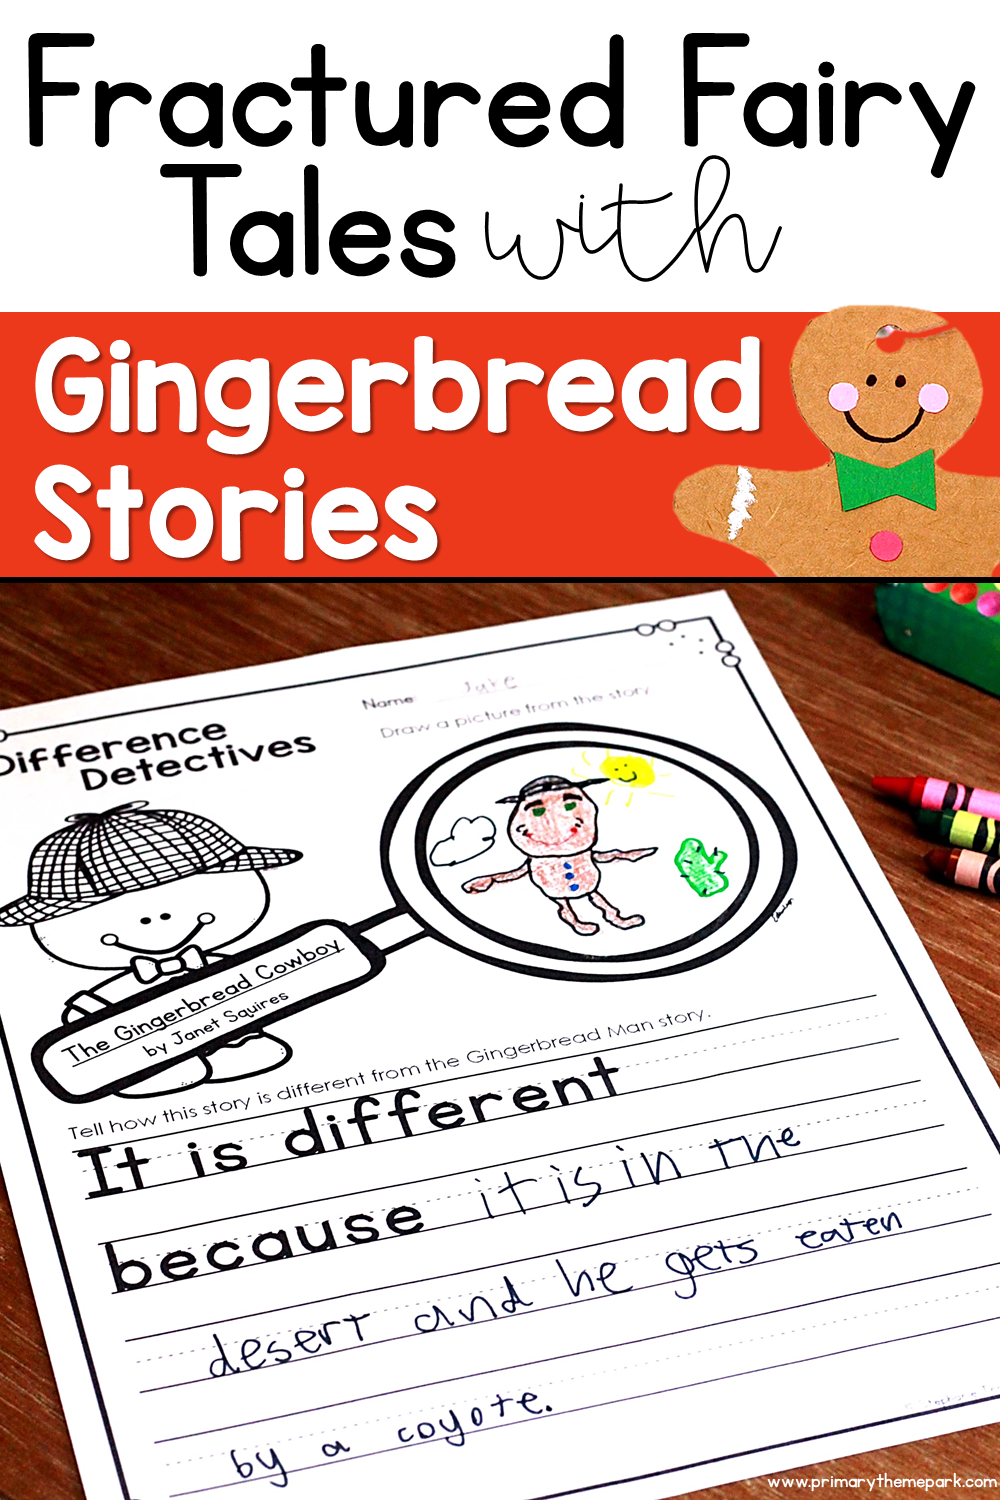 Fractured Fairy Tales with Gingerbread Stories